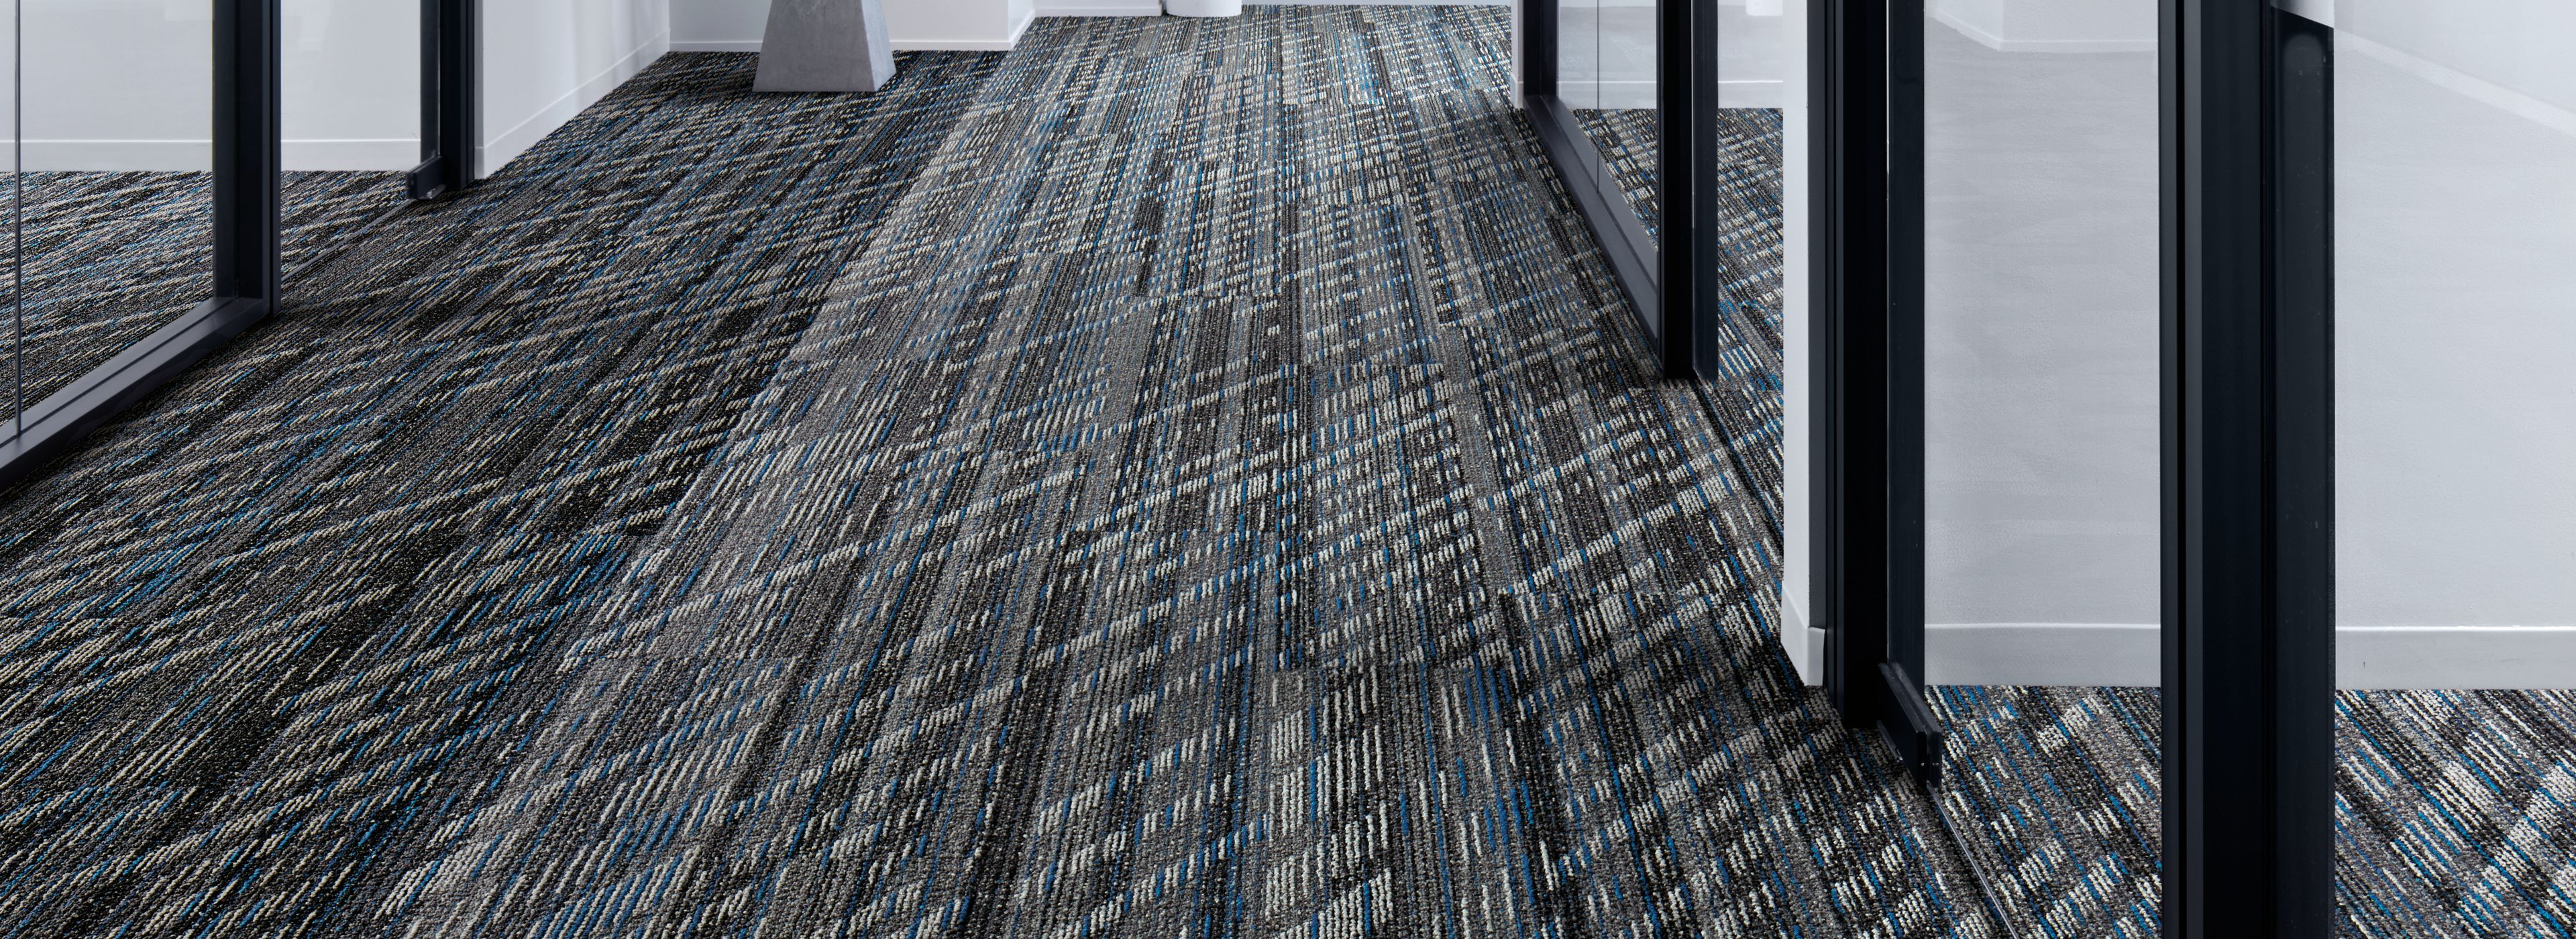 Interface Soft Glow plank carpet tile in office hallway image number 3